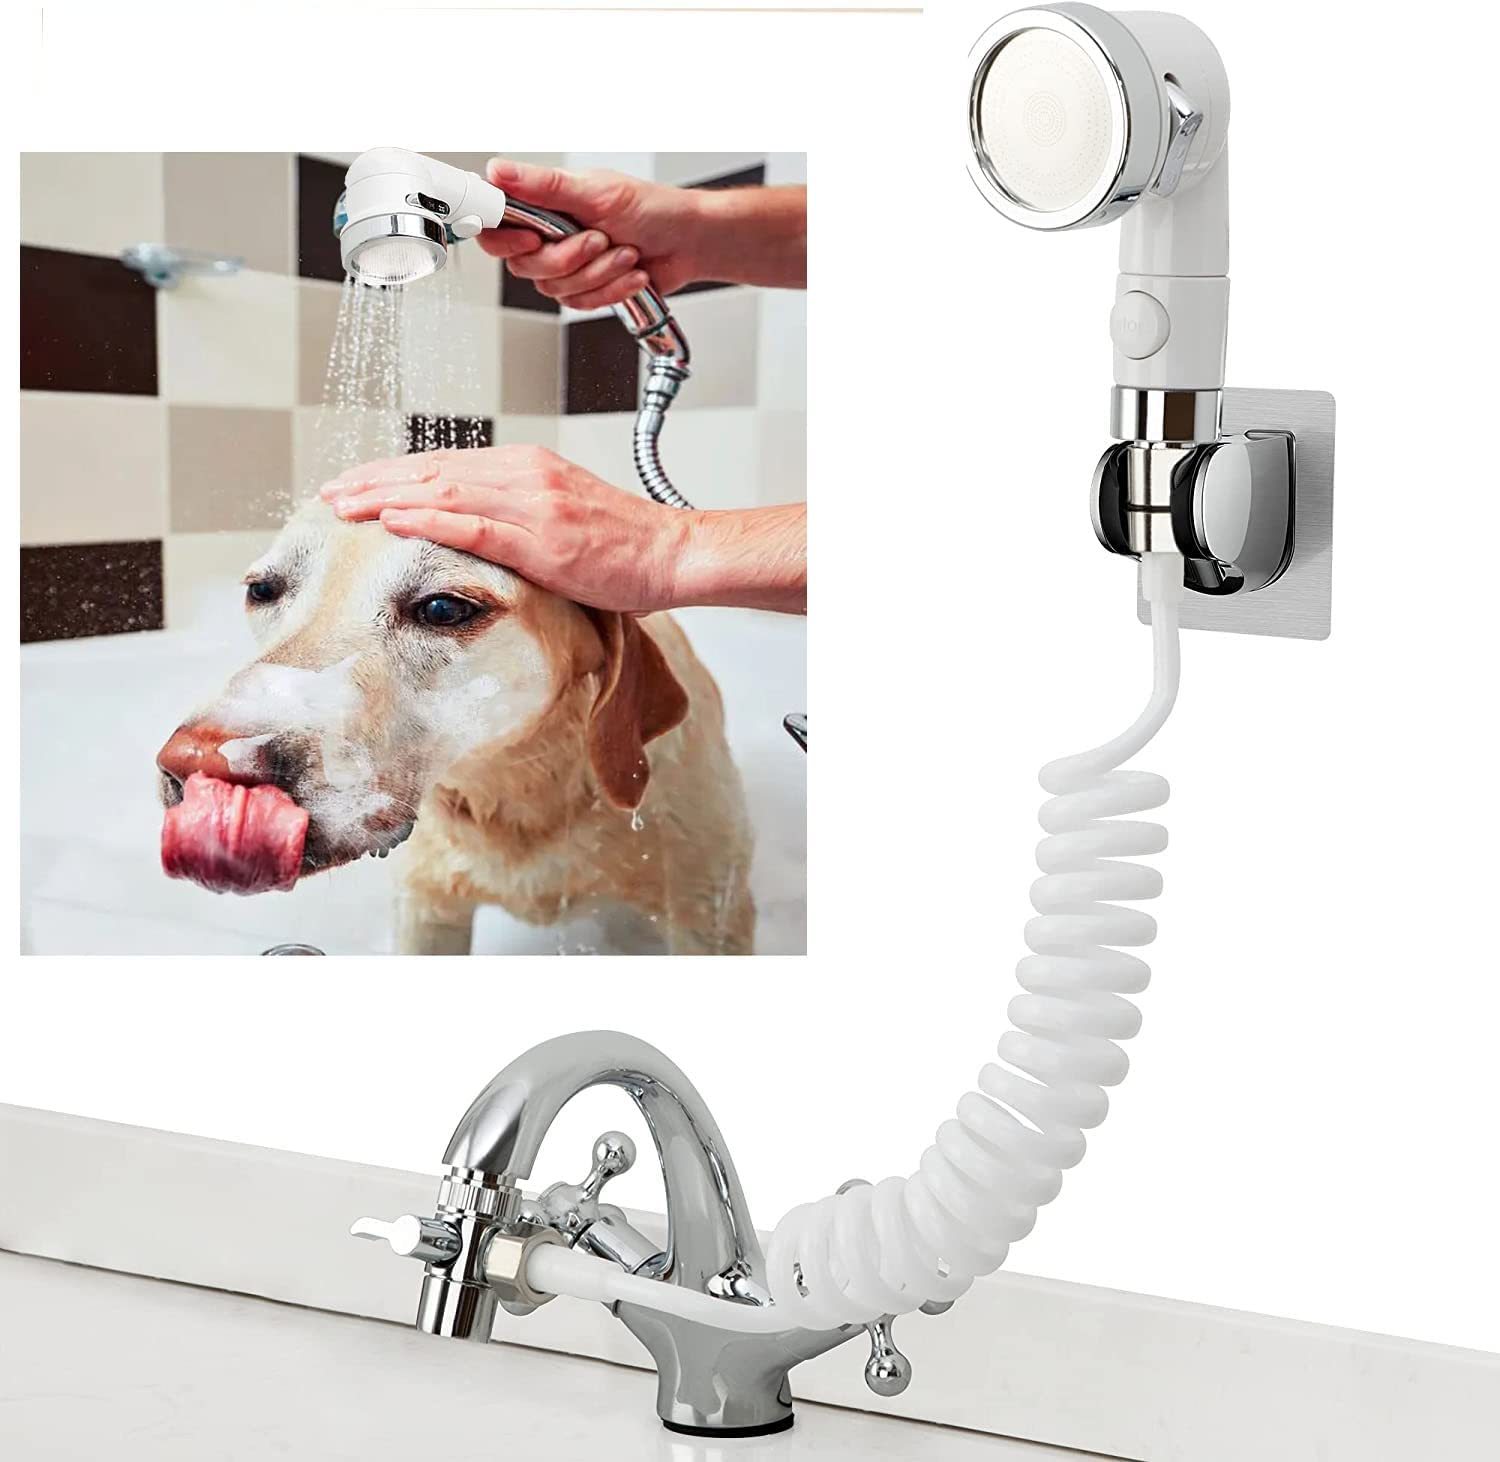 Primary image for Shower Sprayer Attachment For Dogs, Quick And Simple At-Home Dog Cleaning.